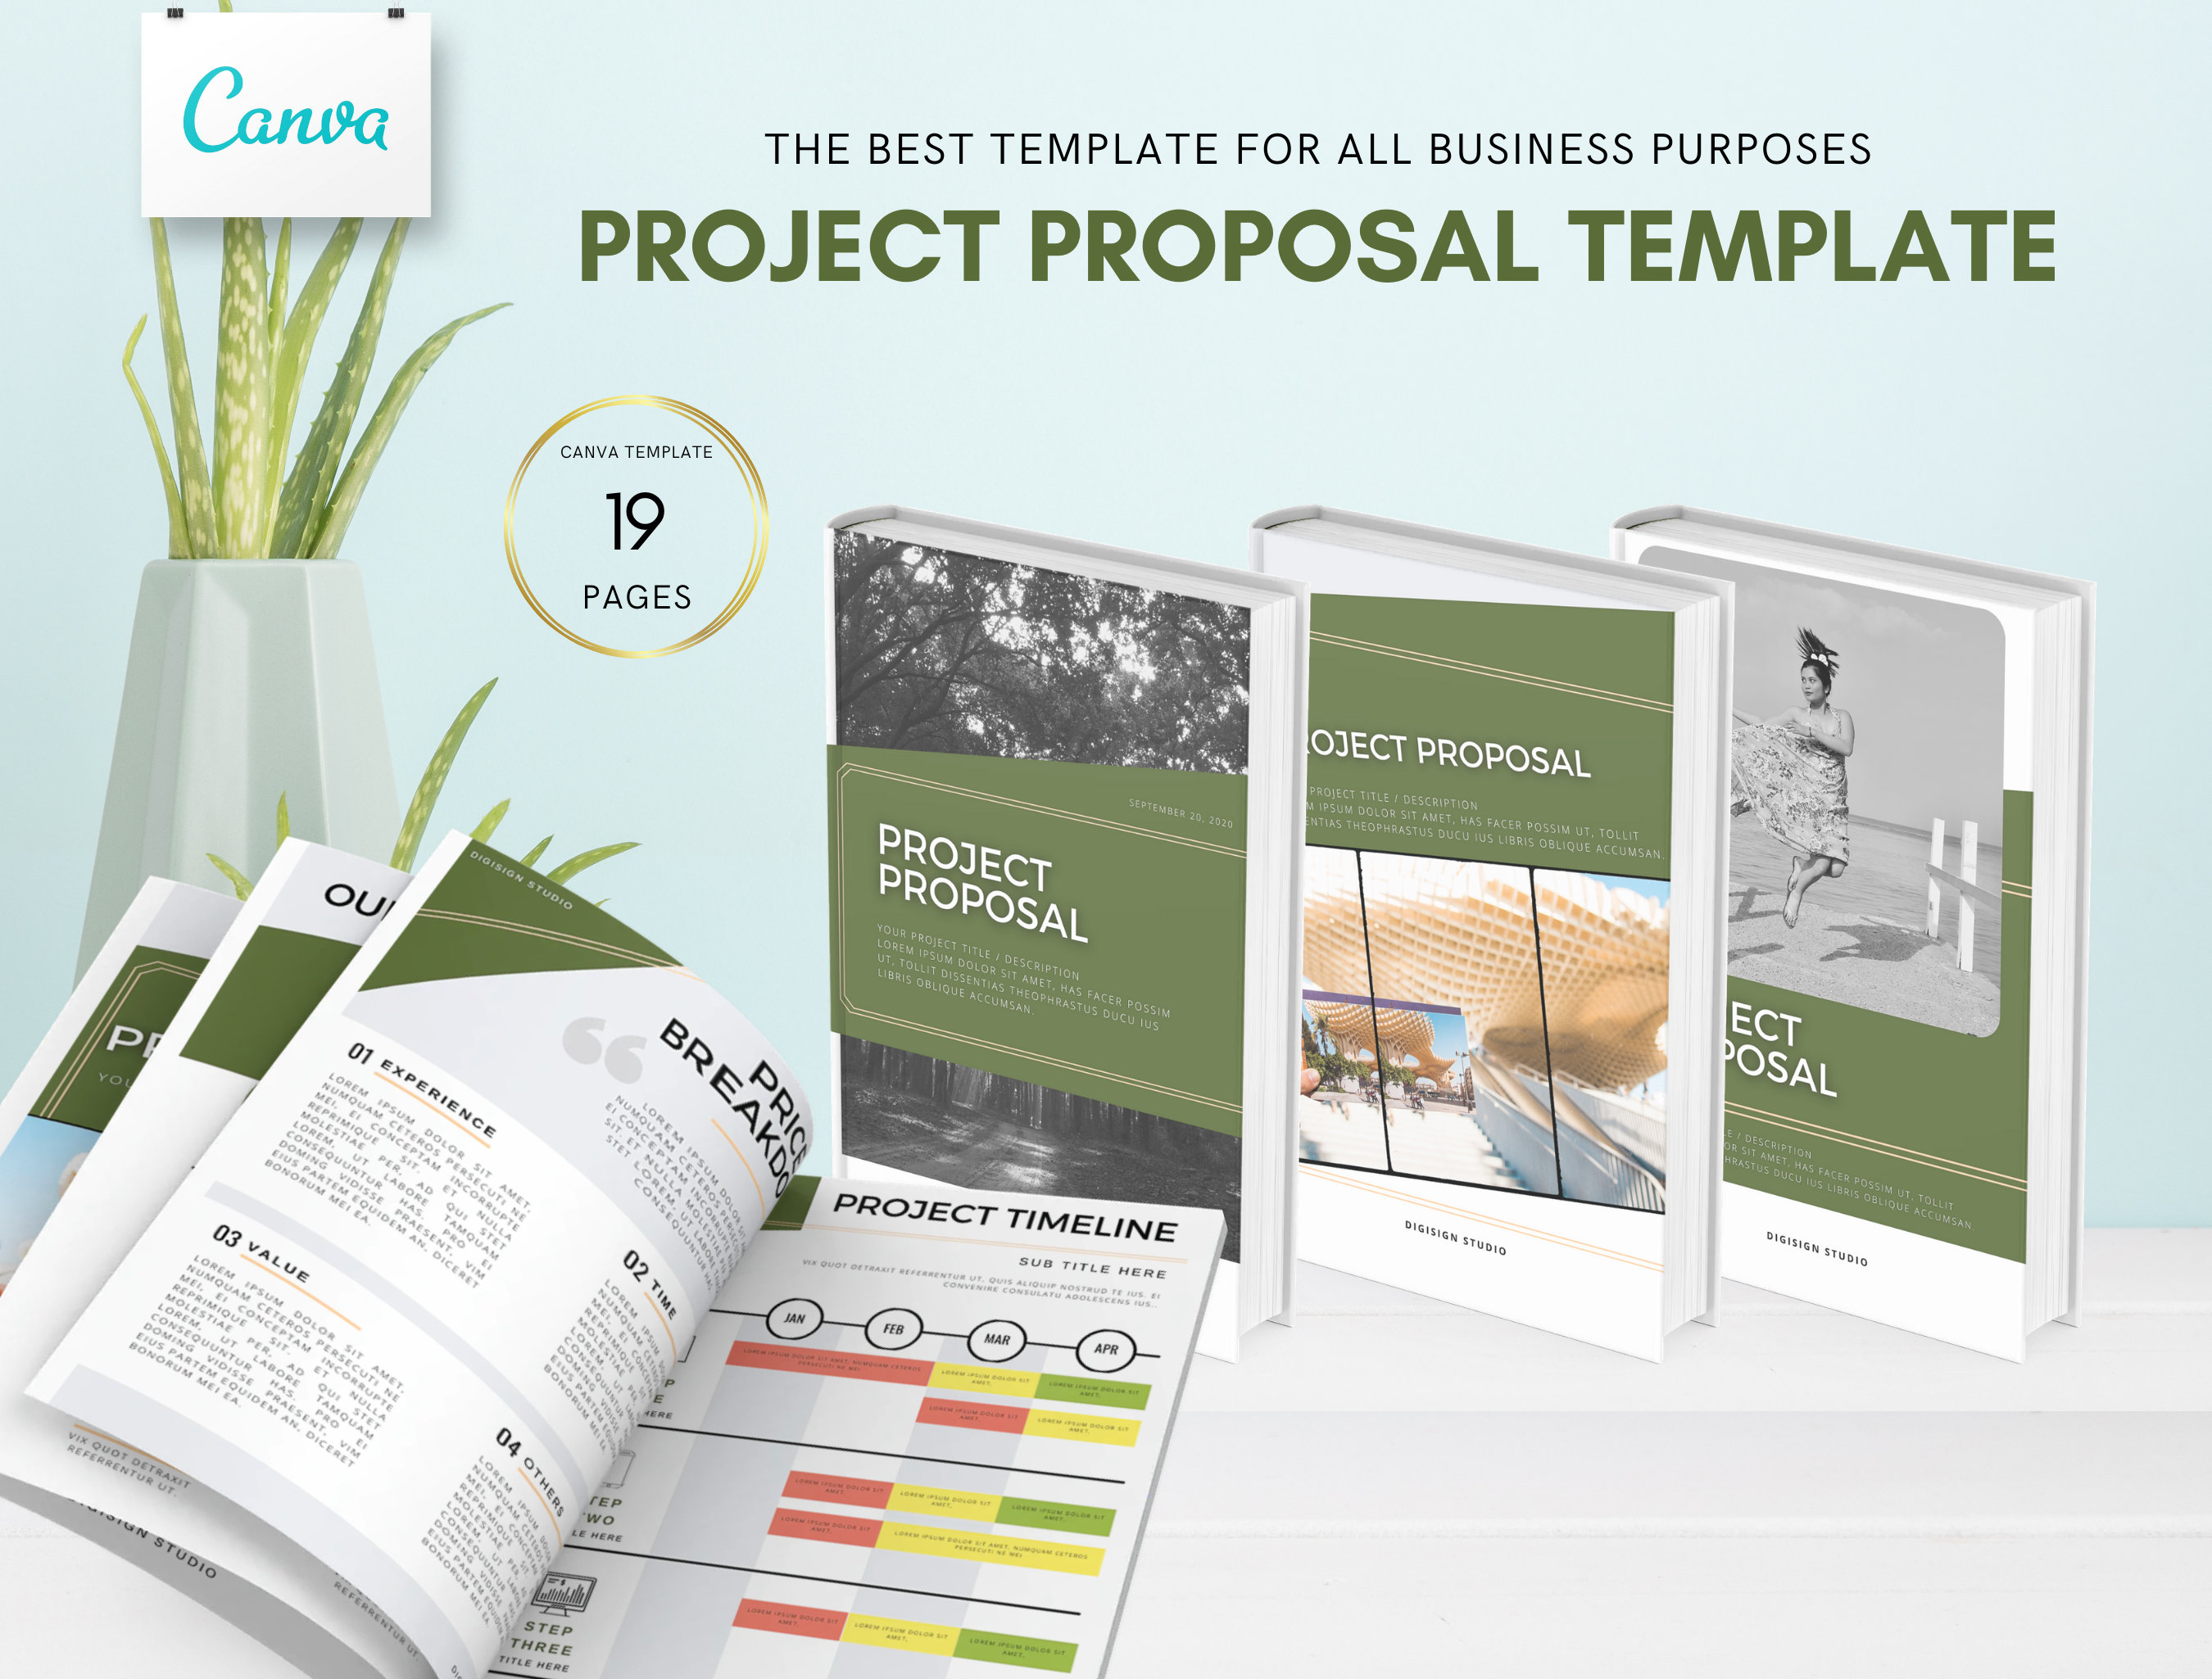 canva-project-proposal-template-editable-business-proposal-etsy-uk